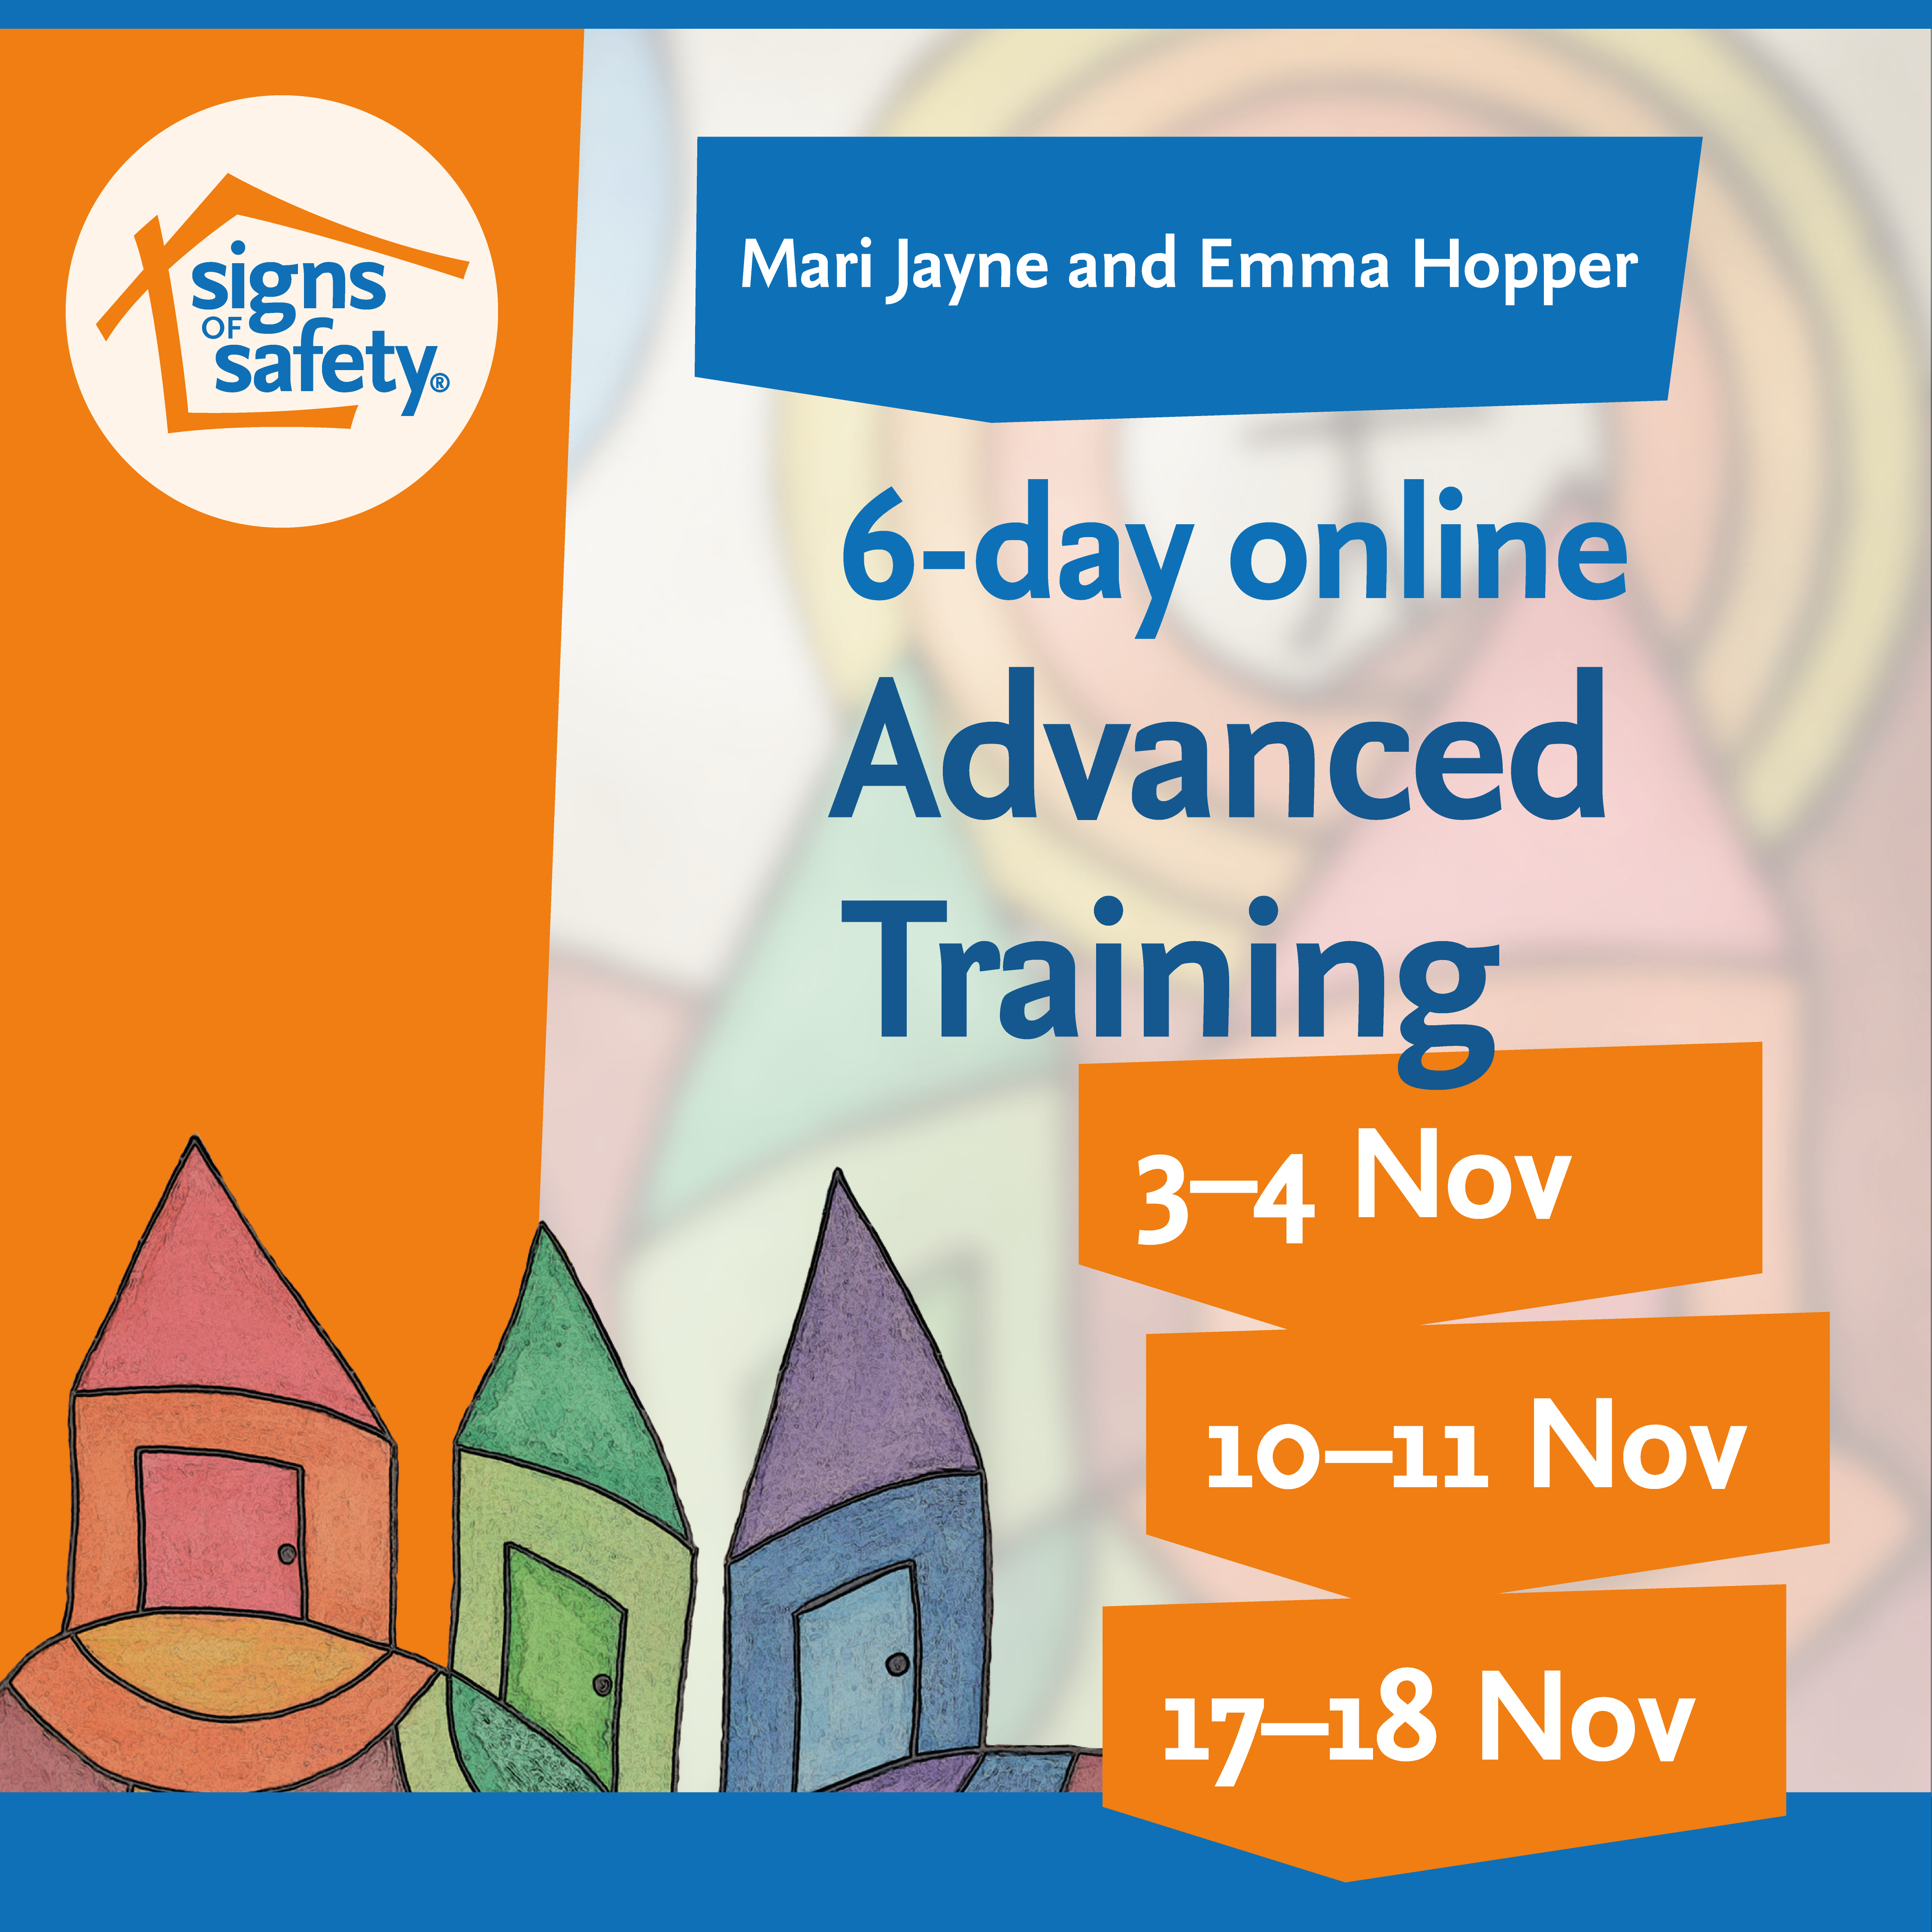 6-day online Advanced Training